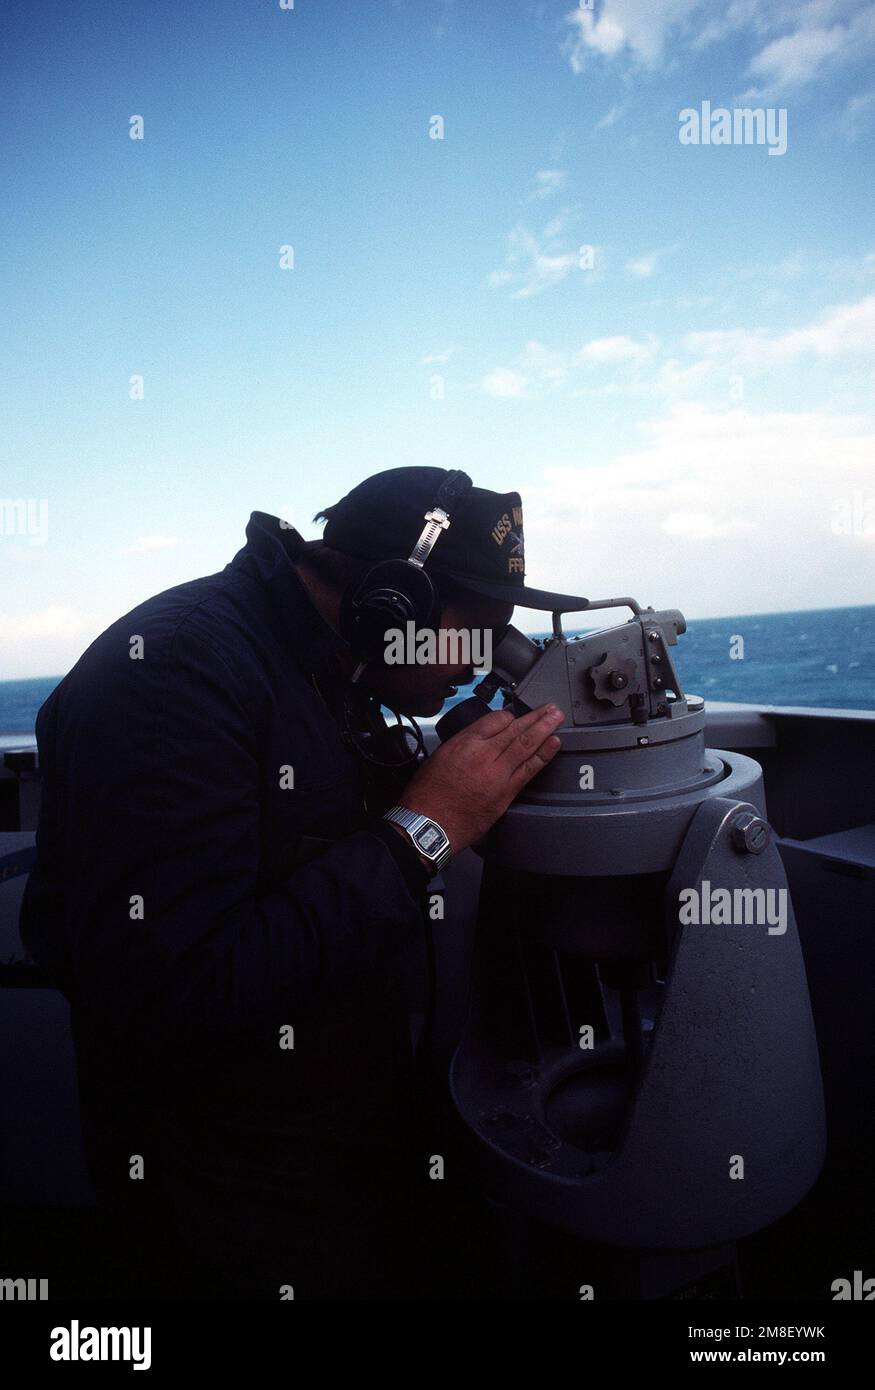 A quartermaster aboard the guided missile frigate USS NICHOLAS (FFG-47) uses a telescopic alidade to take a bearing off the coast of Bermuda as the ship returns to Naval Station, Charleston, S.C., following its deployment to the Persian Gulf region for Operation Desert Shield and Operation Desert Storm. Subject Operation/Series: DESERT SHIELD DESERT STORM Country: Atlantic Ocean (AOC) Stock Photo